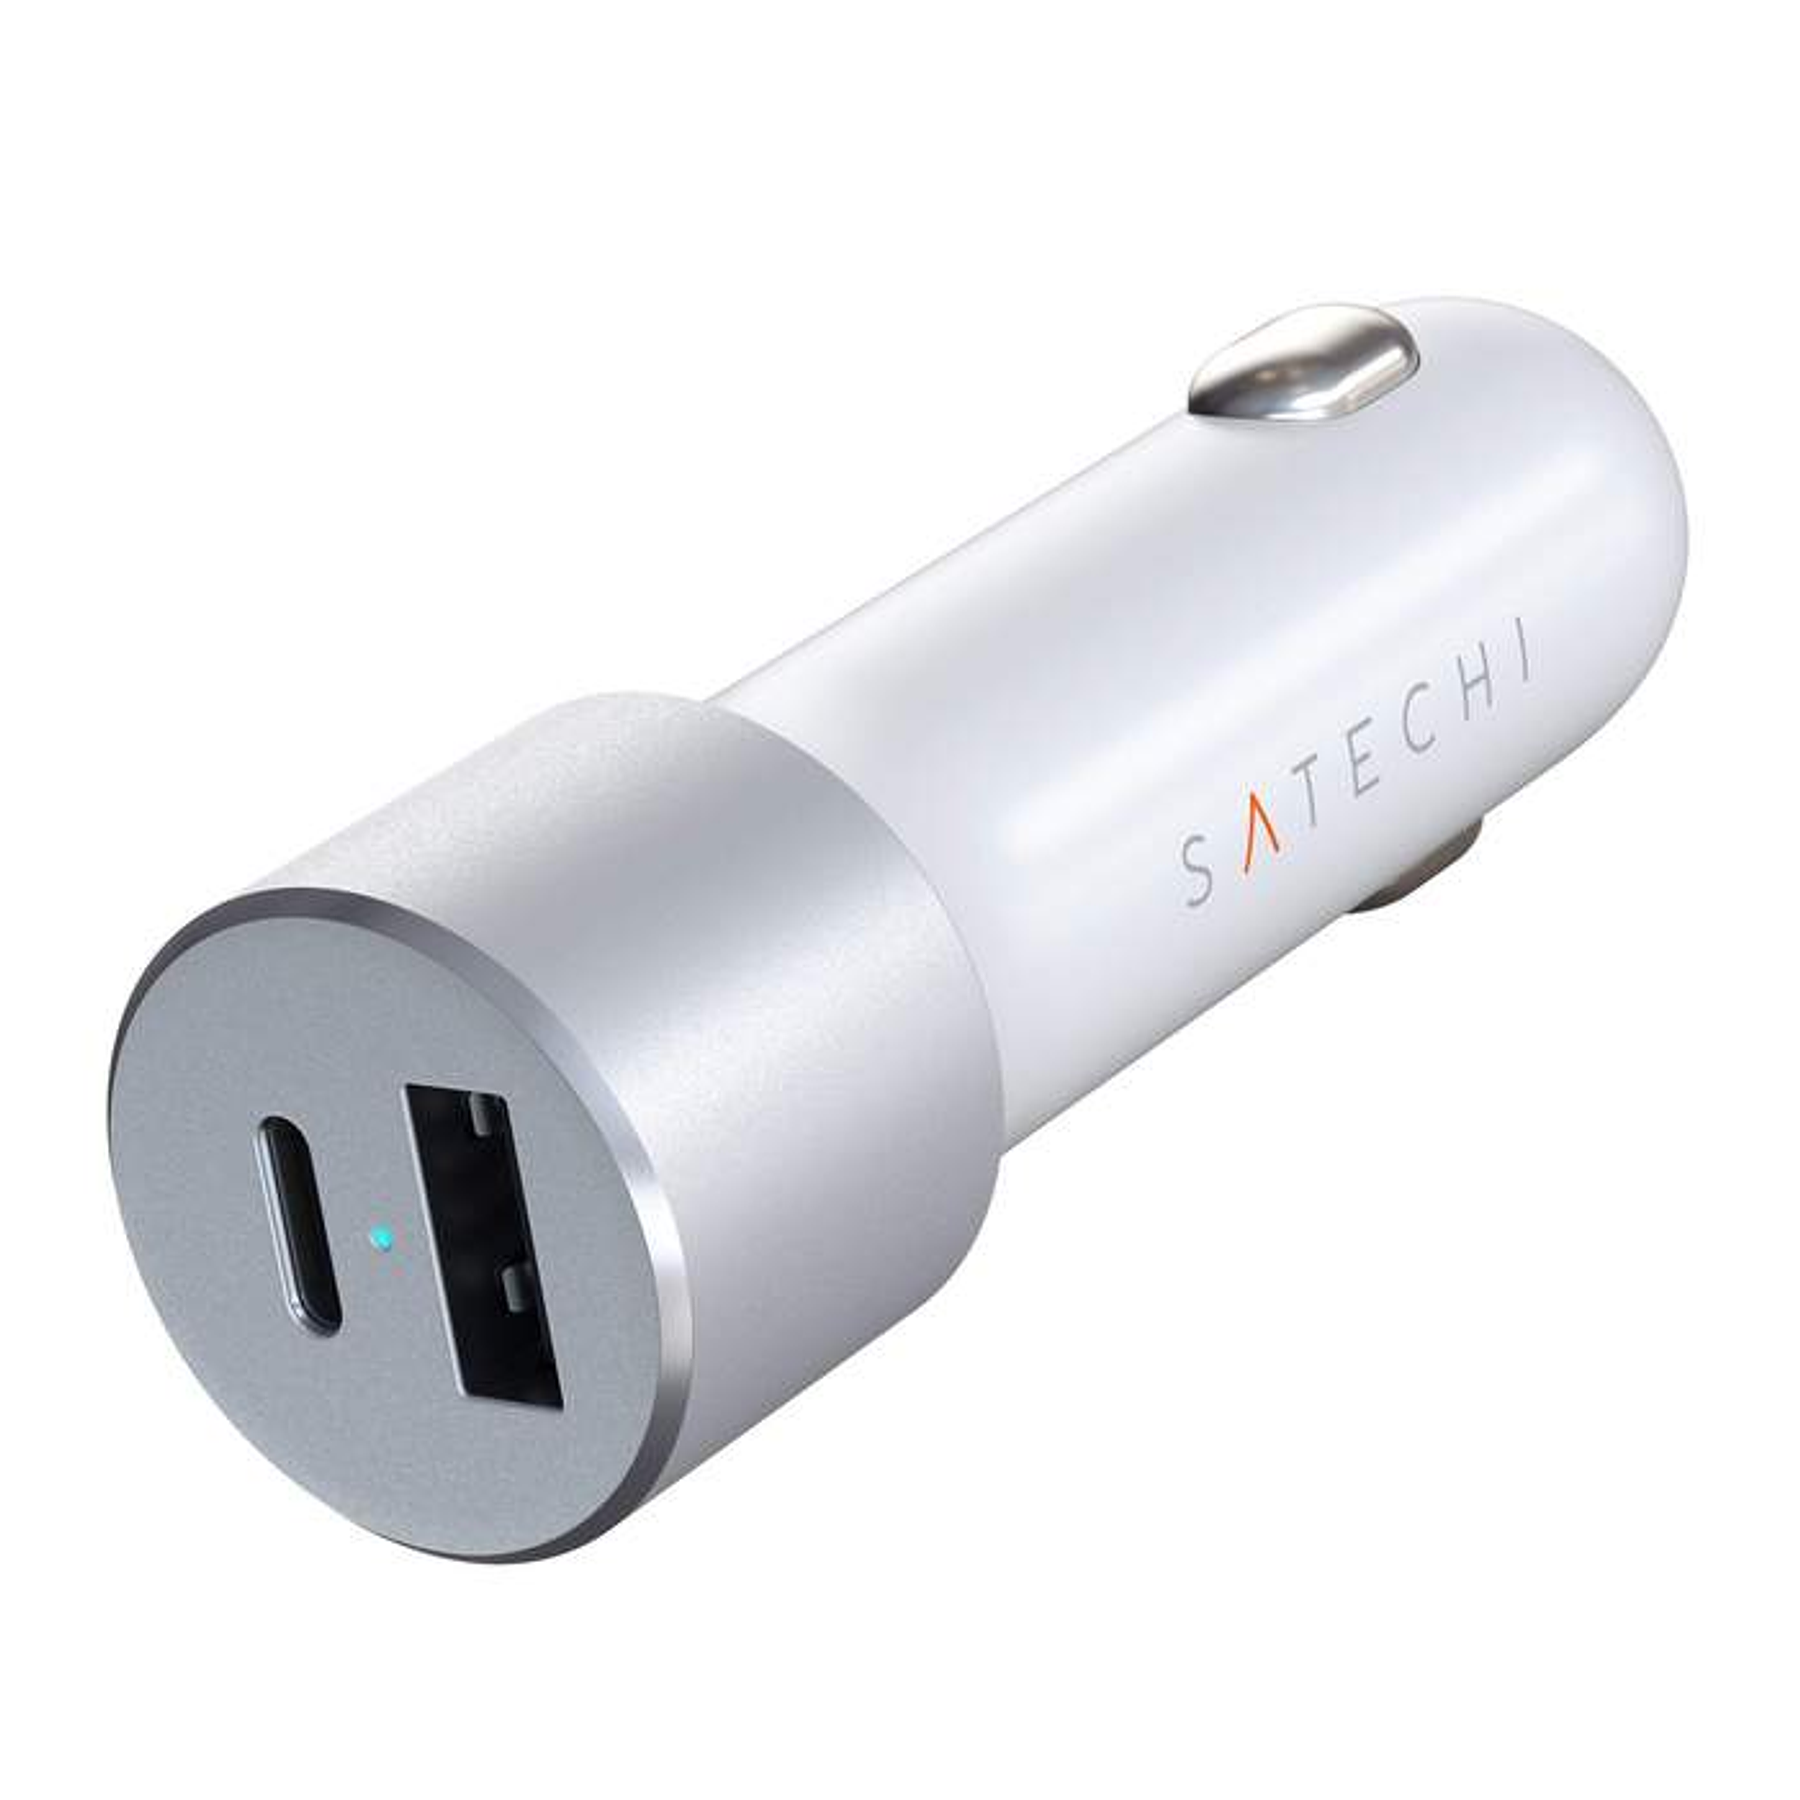 Satechi - 72W USB-C PD Car Charger (silver)